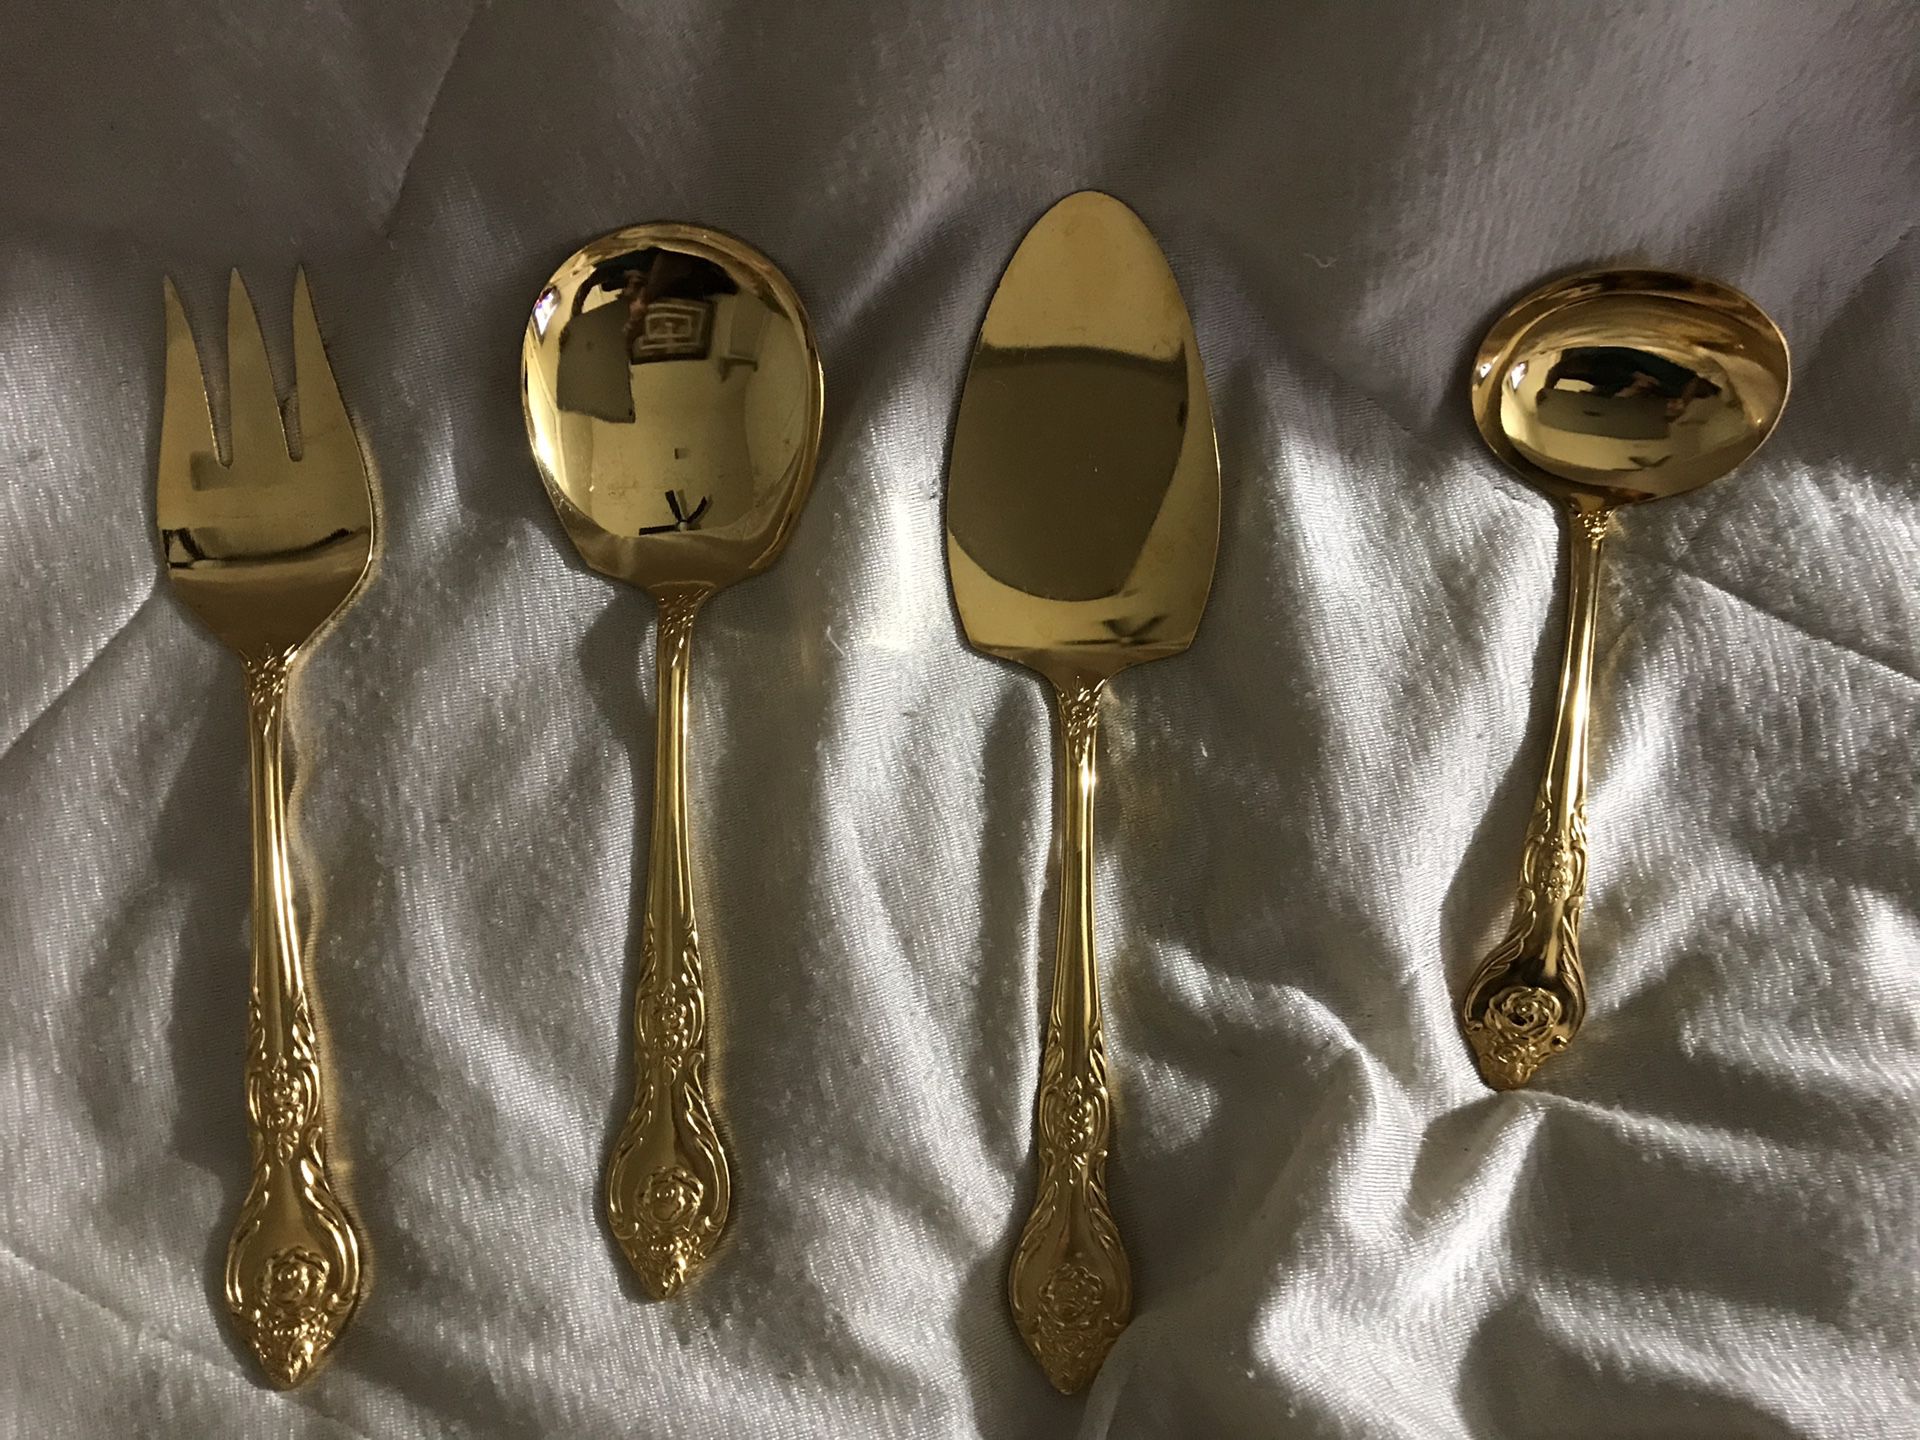 4 Northgate Casserole Spoon Vintage Goldware Regal Flatware Silverware. Not sure of the names of the different goldware.